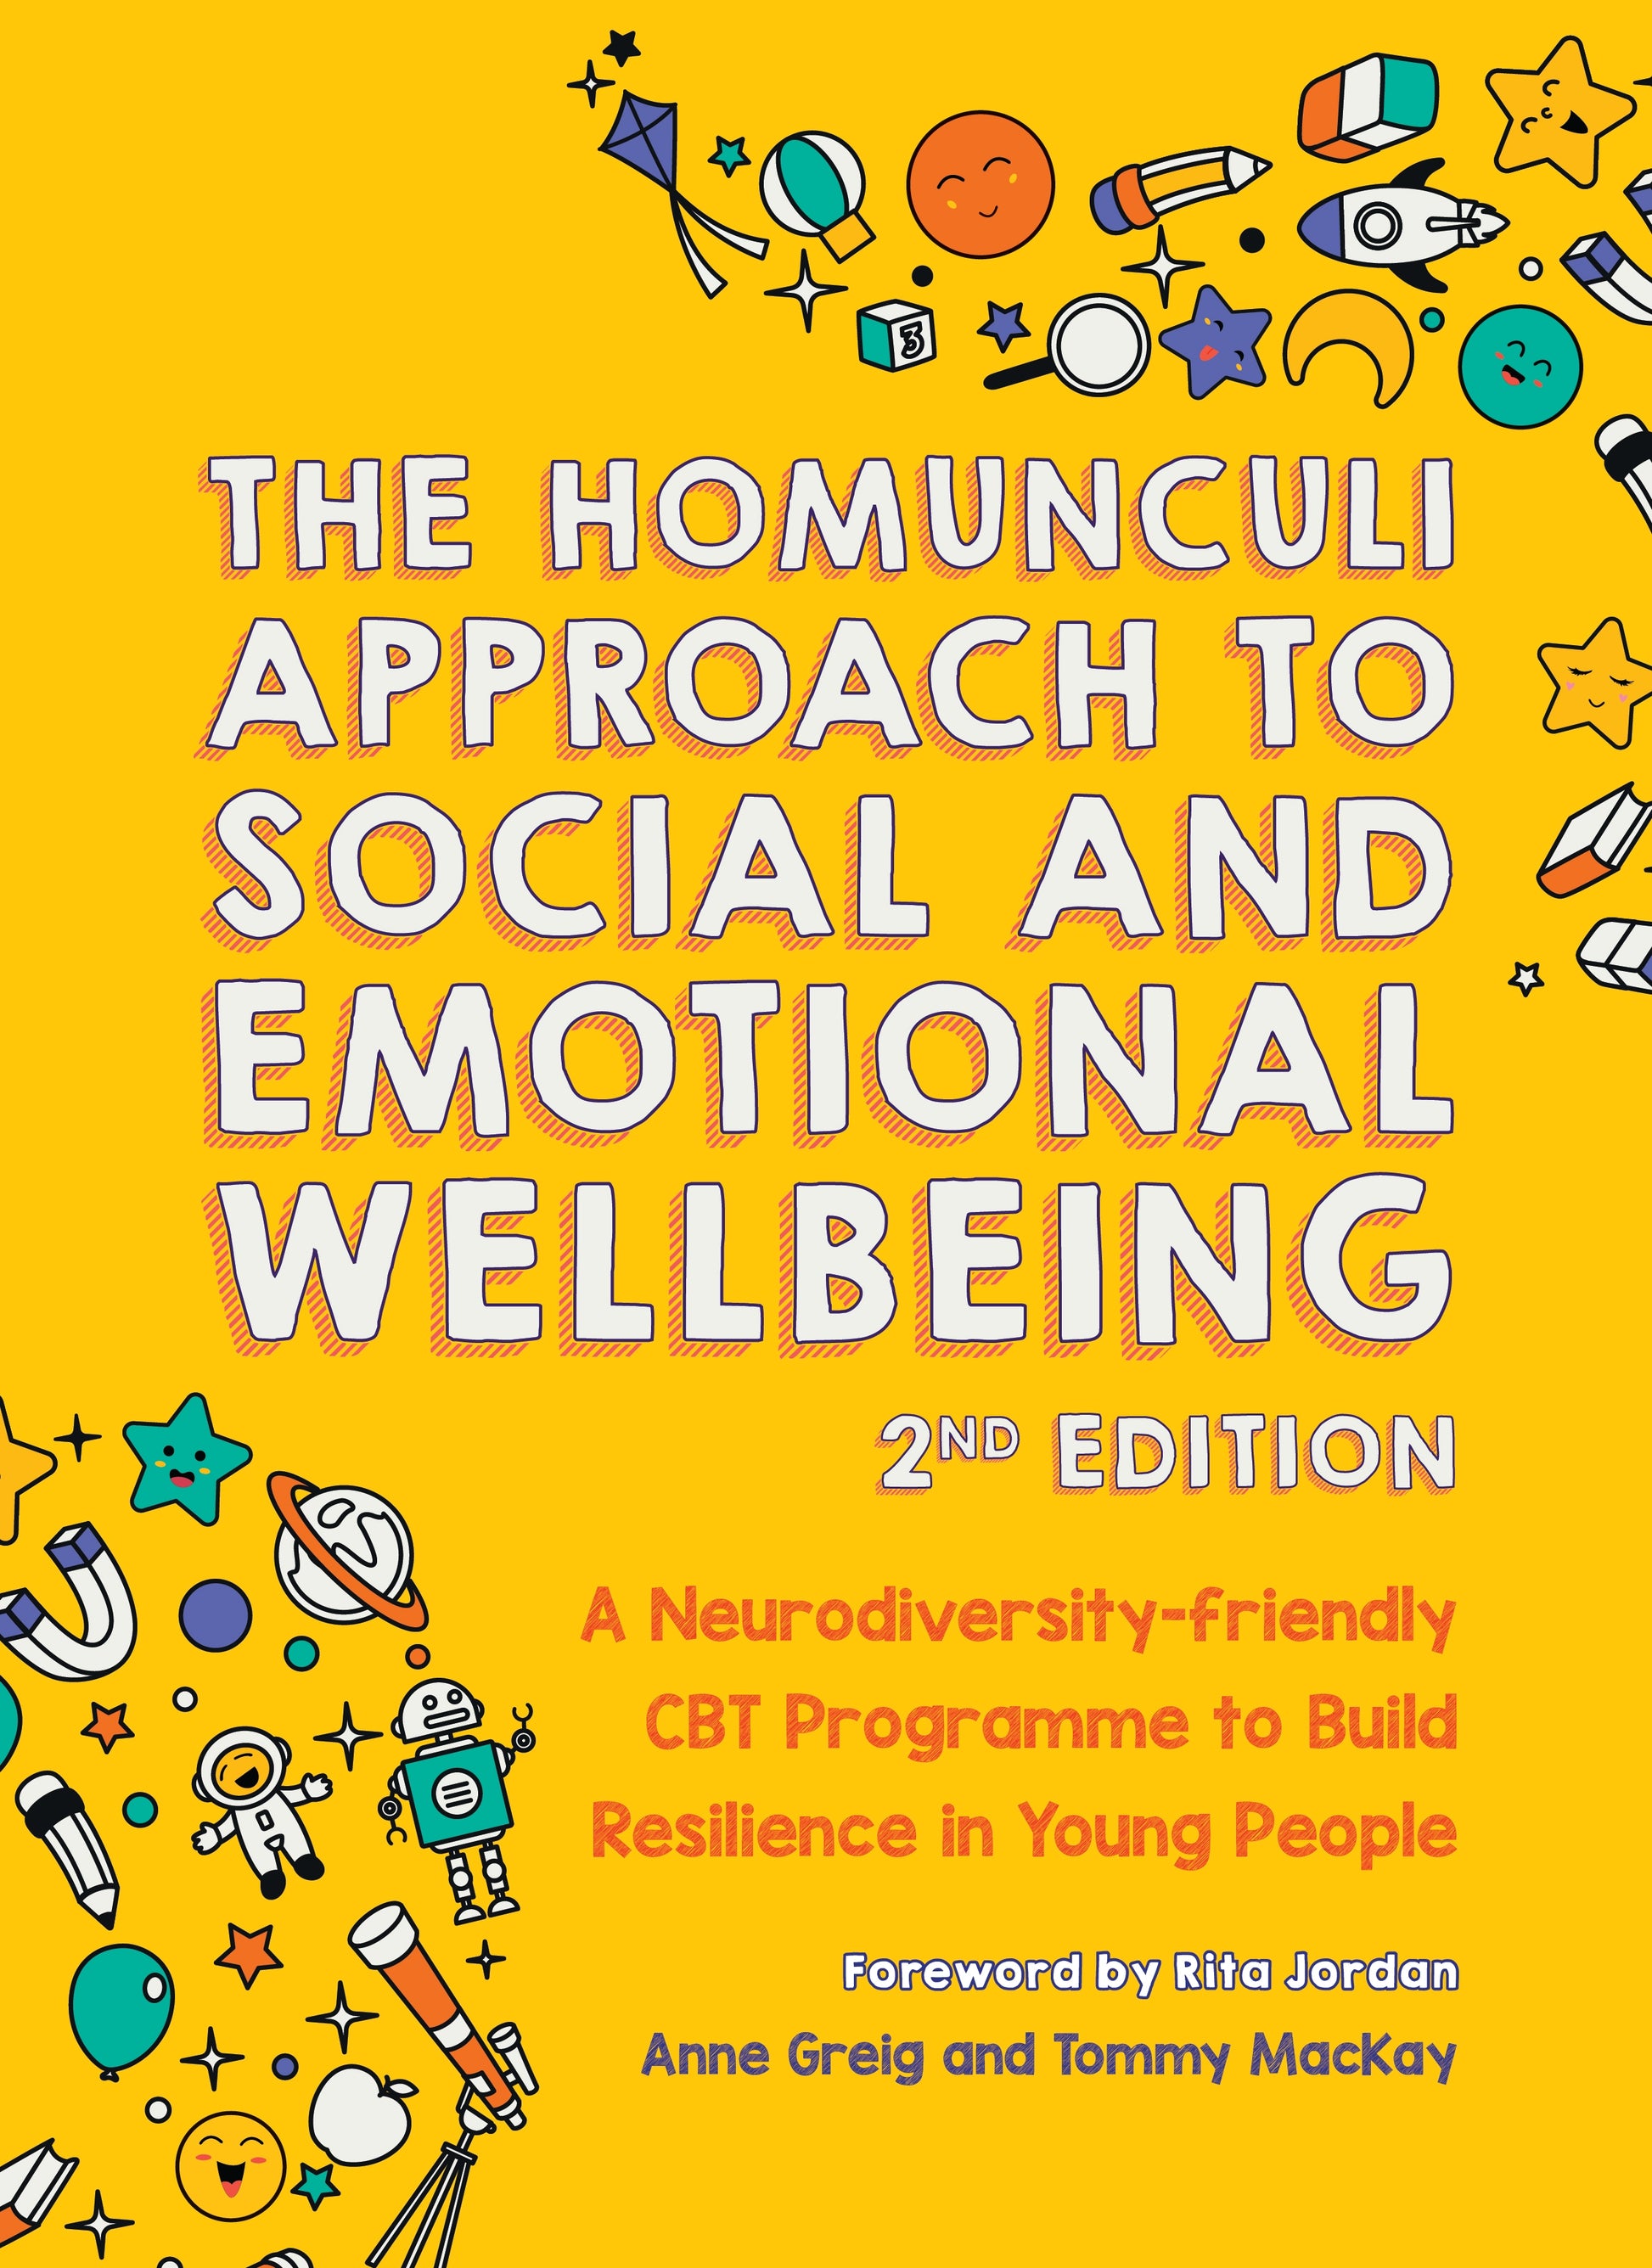 The Homunculi Approach To Social And Emotional Wellbeing 2nd Edition by Rebecca Price, Anne Greig, Tommy MacKay